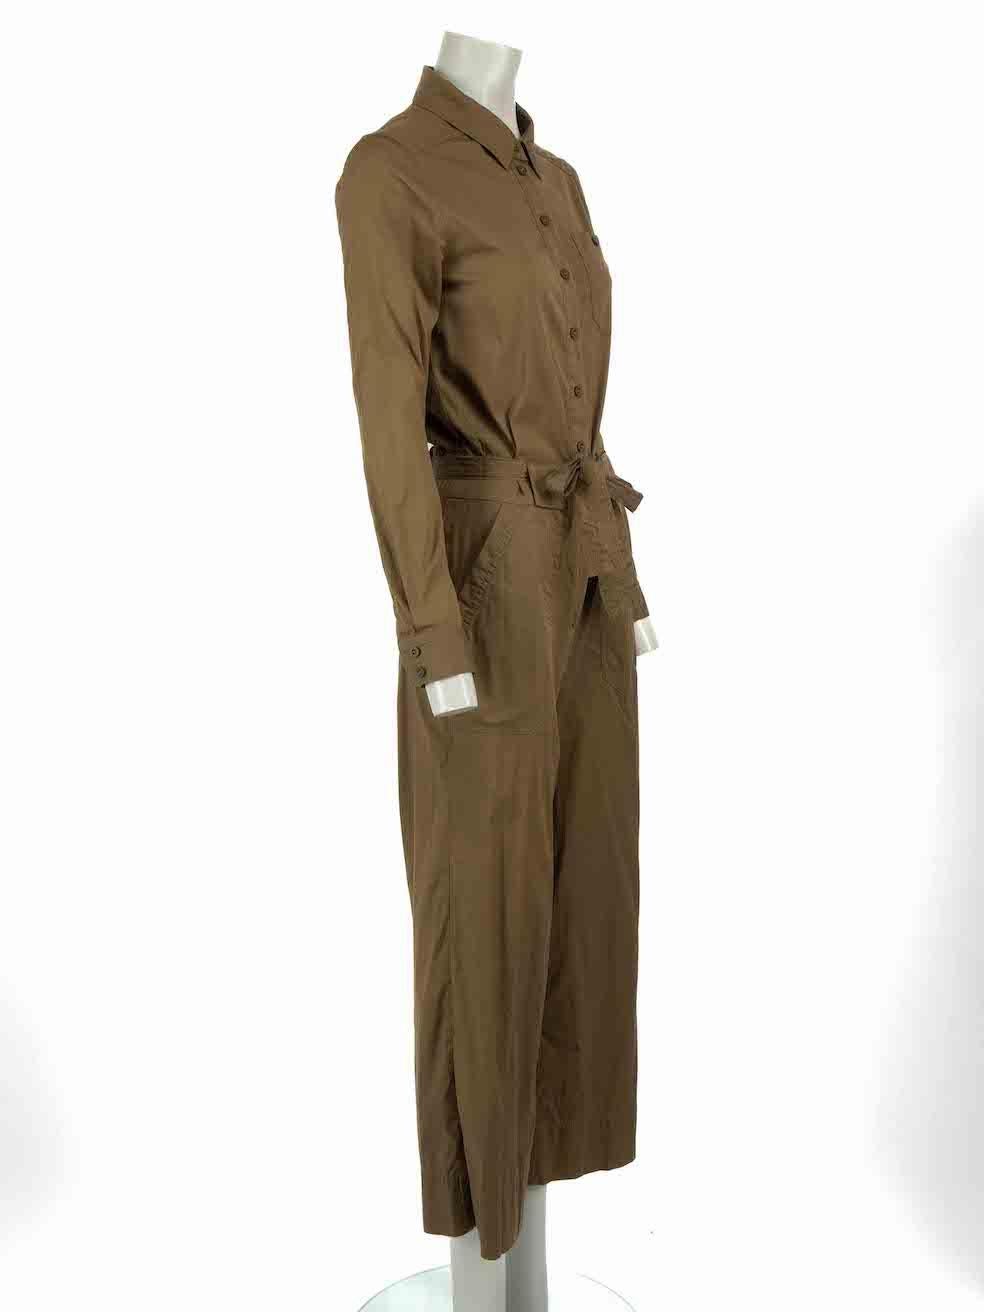 CONDITION is Very good. Minimal wear to jumpsuit is evident. Minimal discoloured marks to overall fabric on this used ME+EM designer resale item.
 
Details
Khaki
Cotton
Jumpsuit
Long sleeves
Straight leg
Button and zip fastening
Buttoned cuffs
Belt